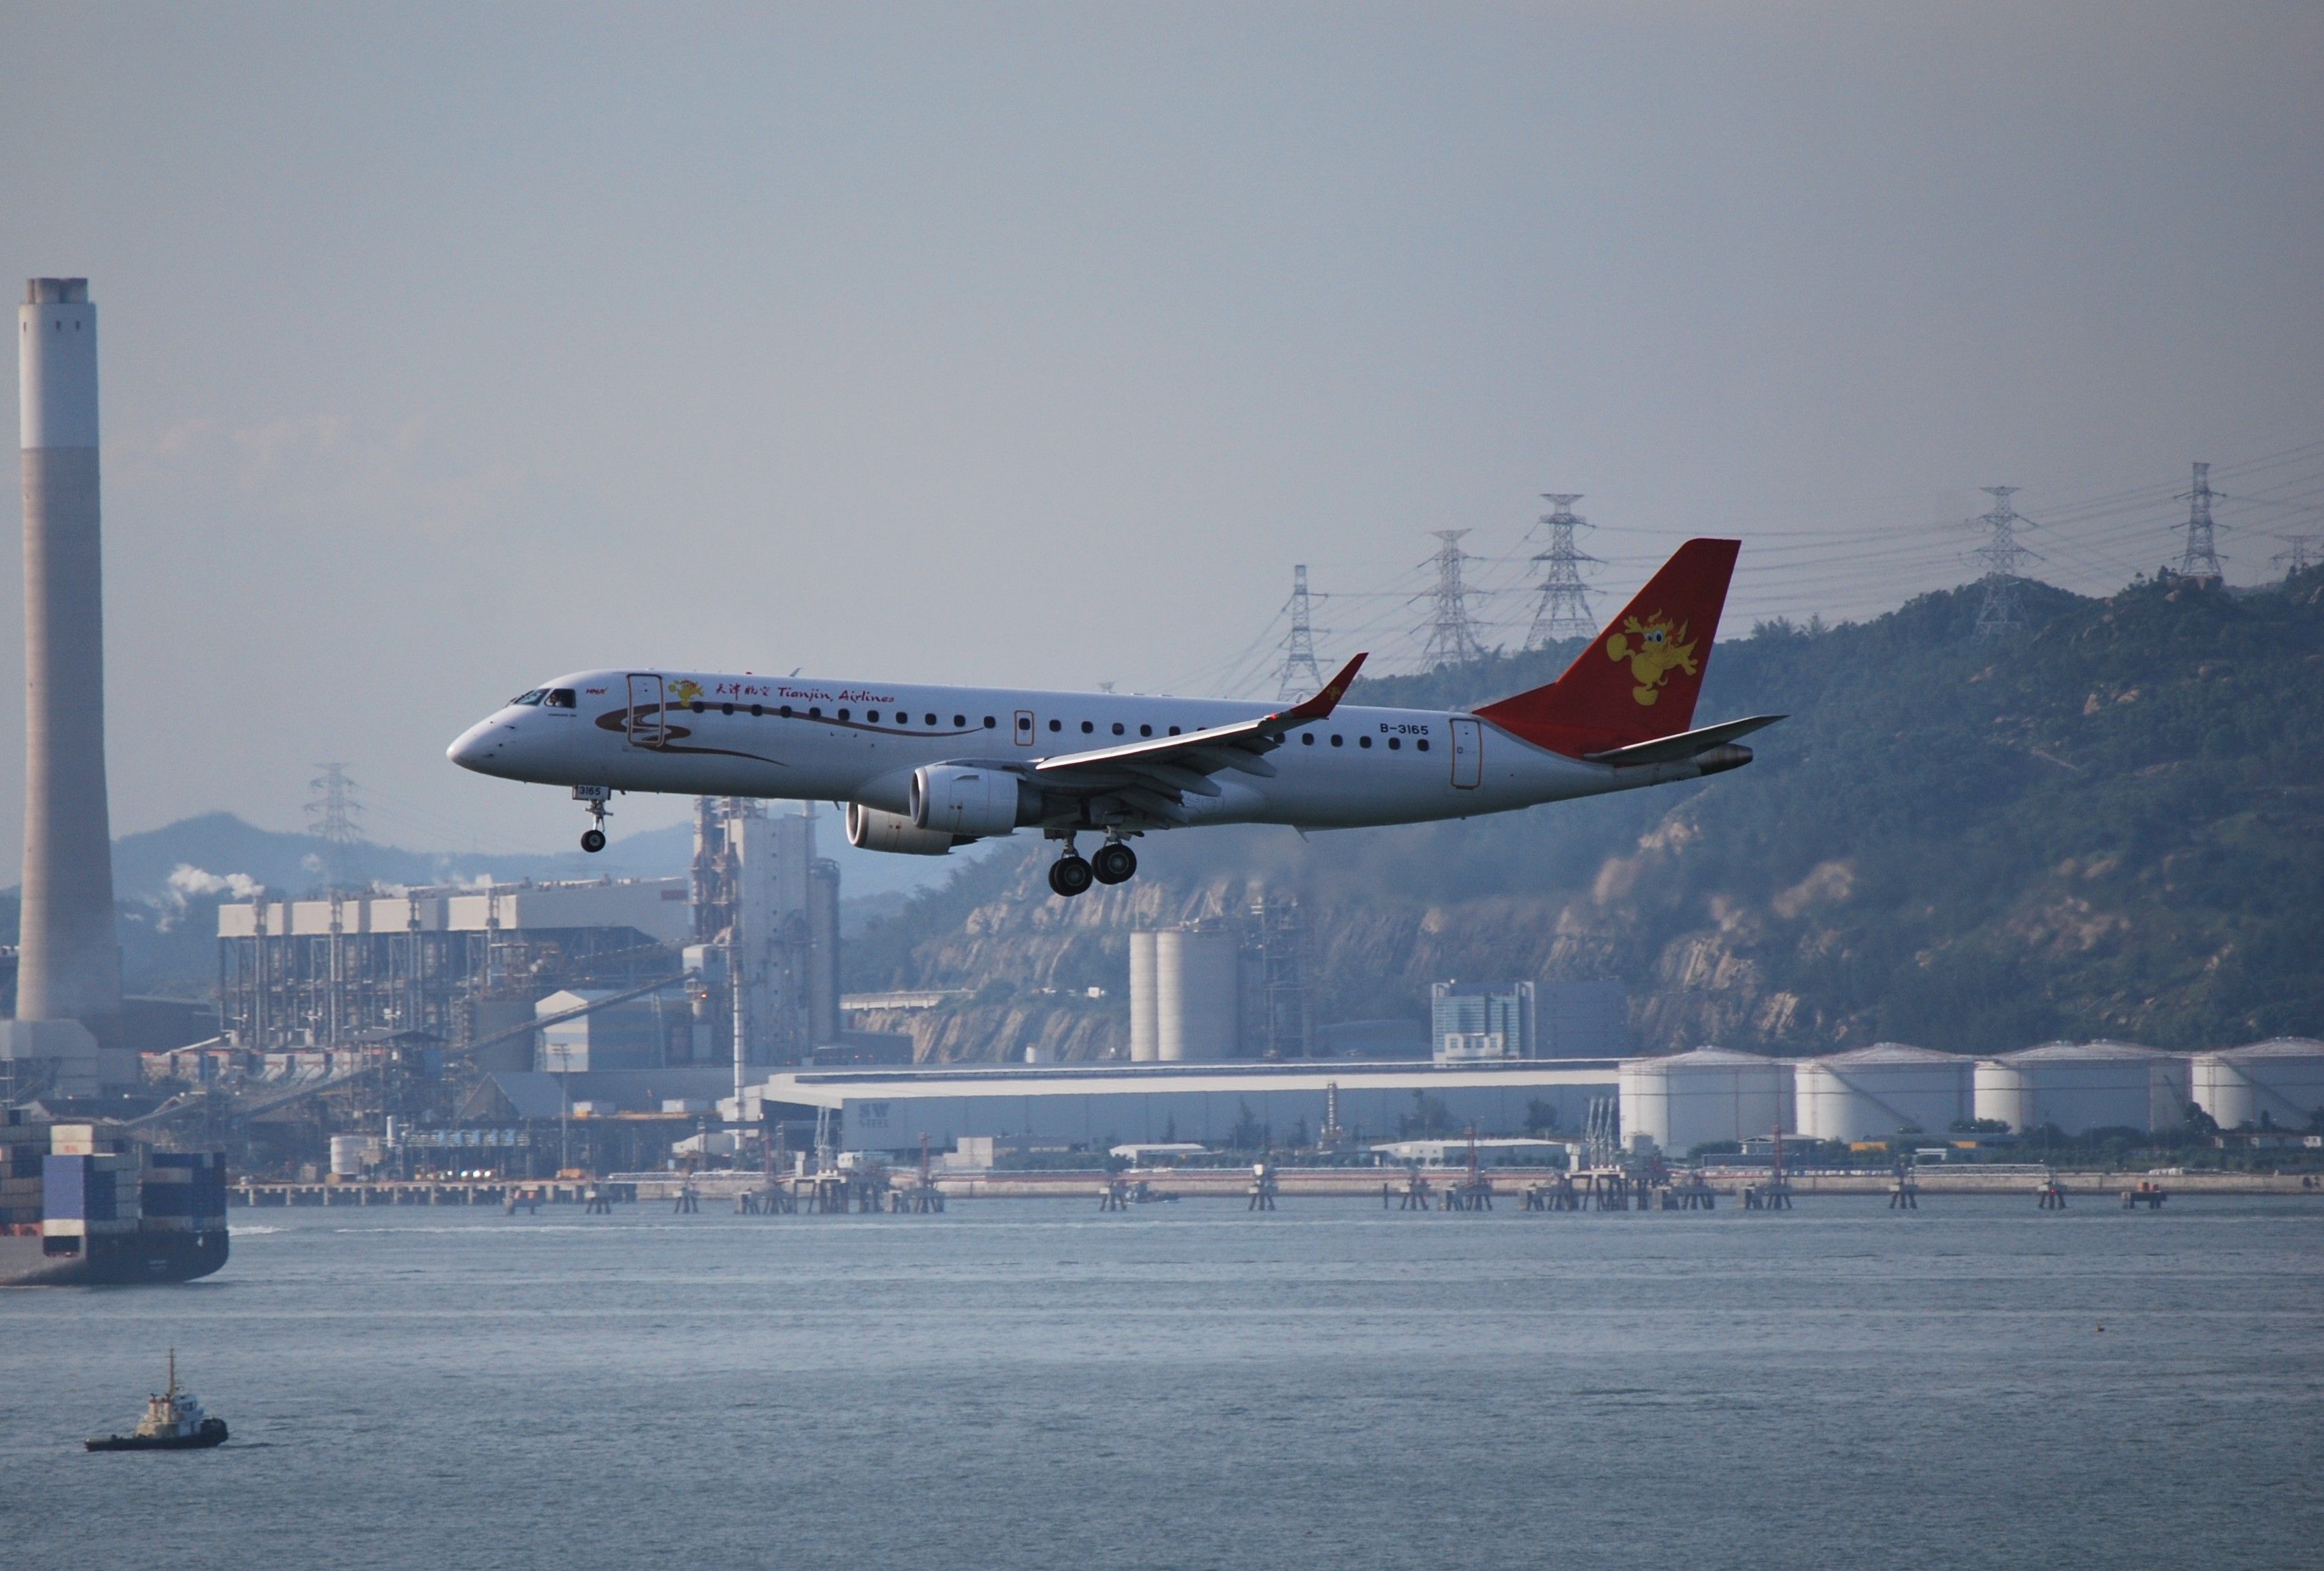 A Tianjin Airlines Embraer aircraft flying over water.